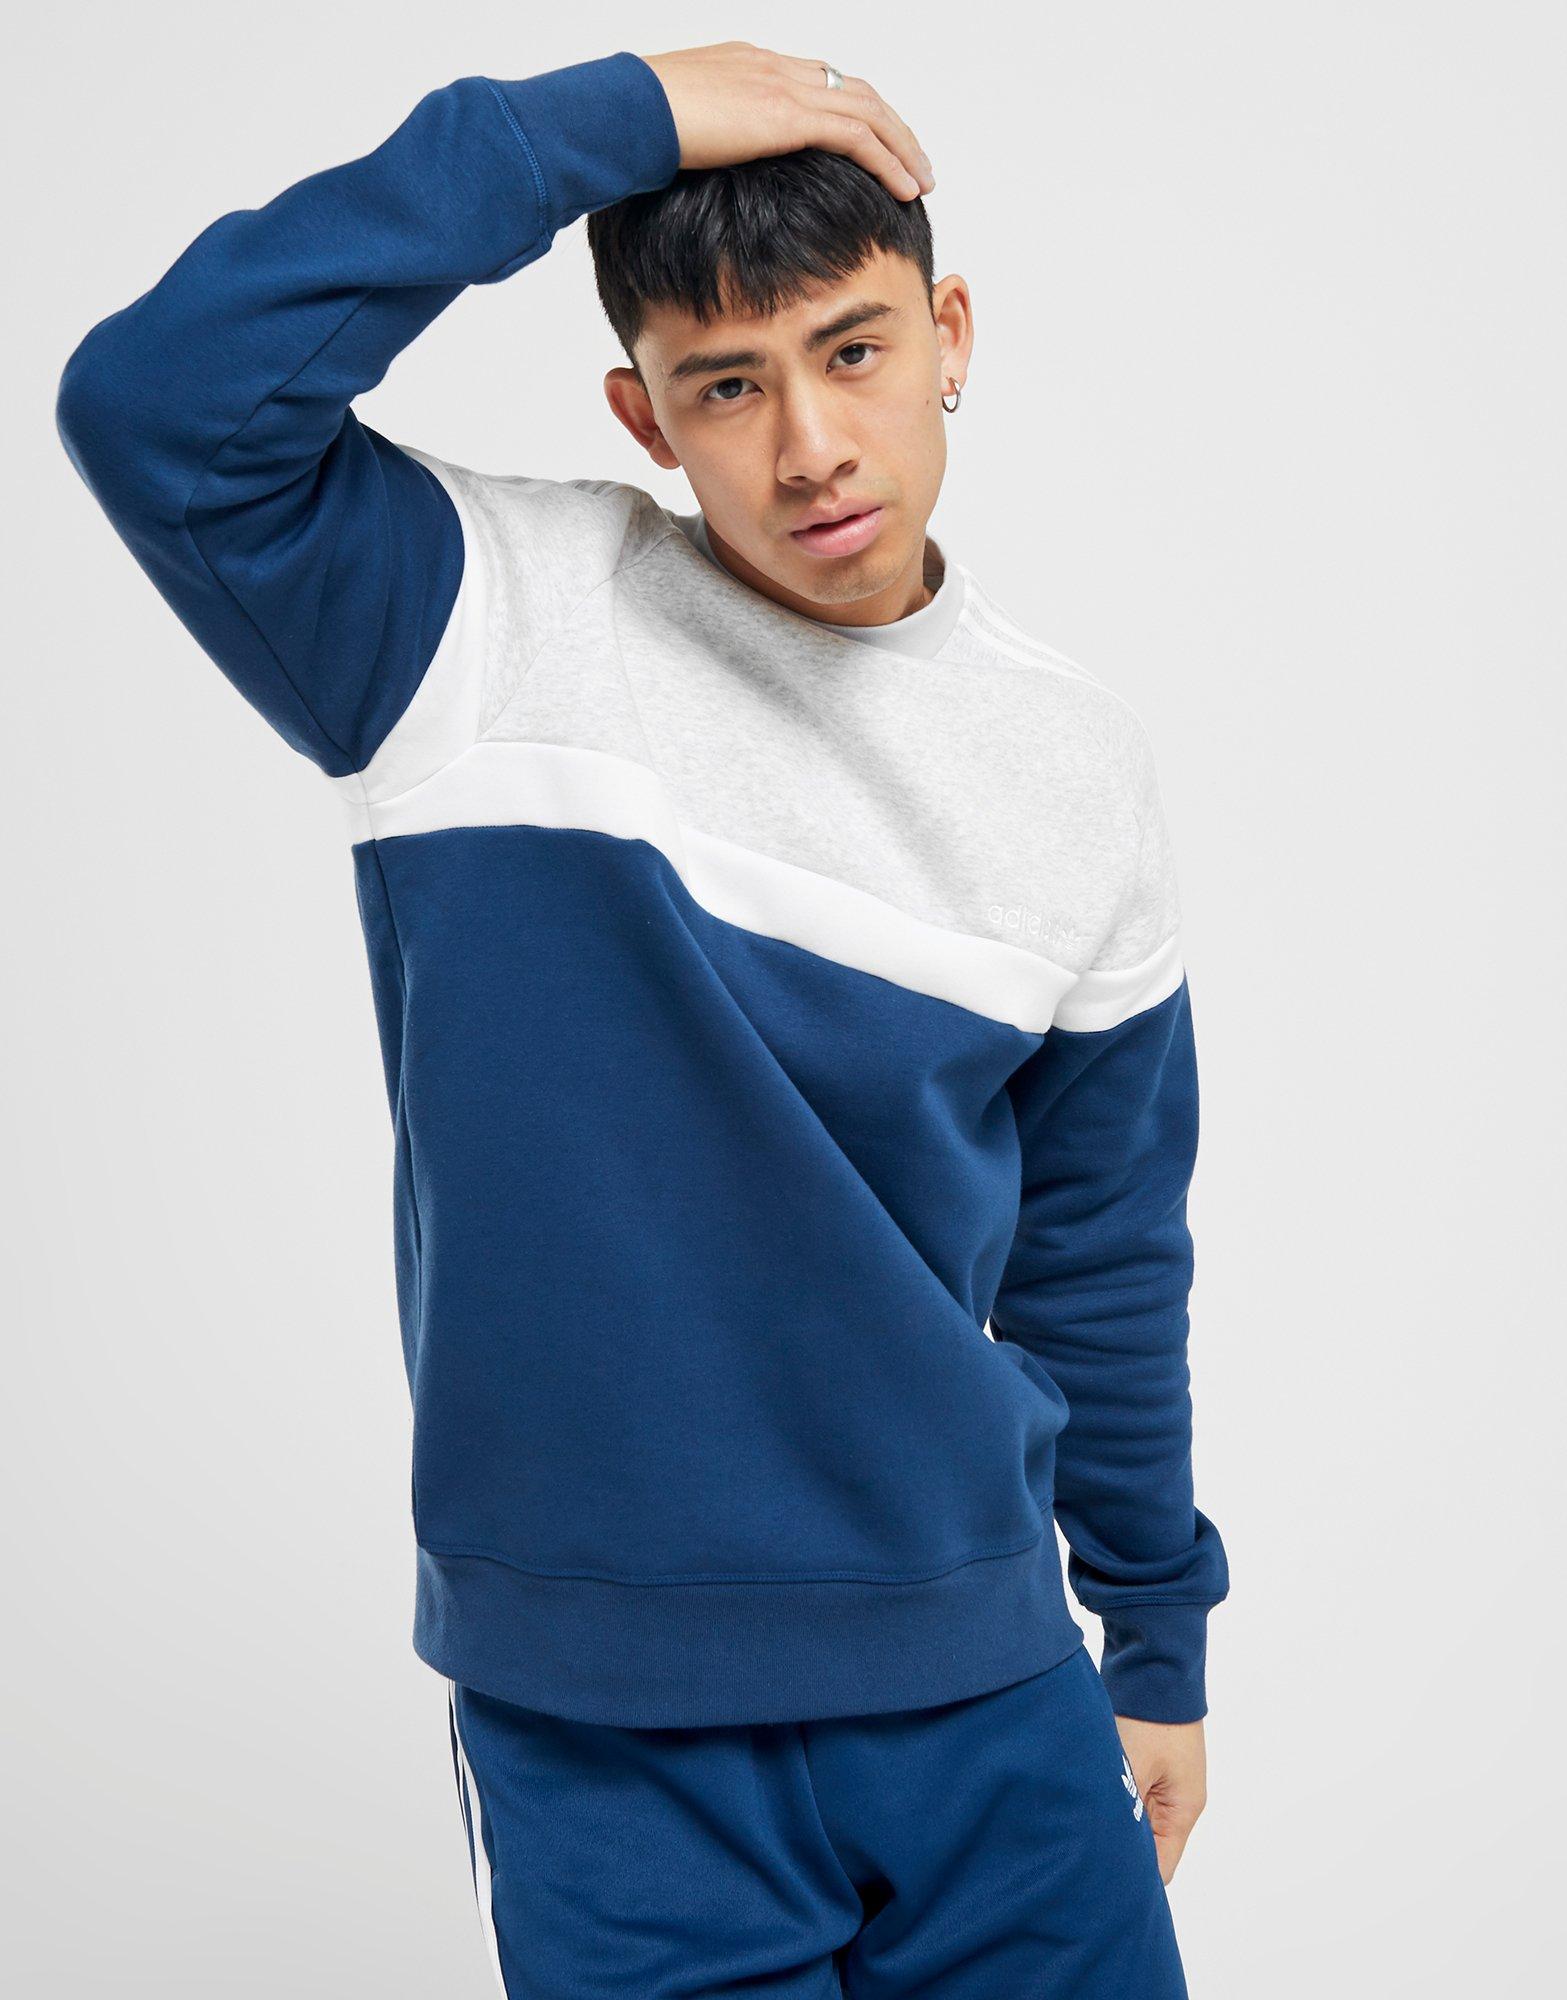 adidas originals linear sweater in lilac and black